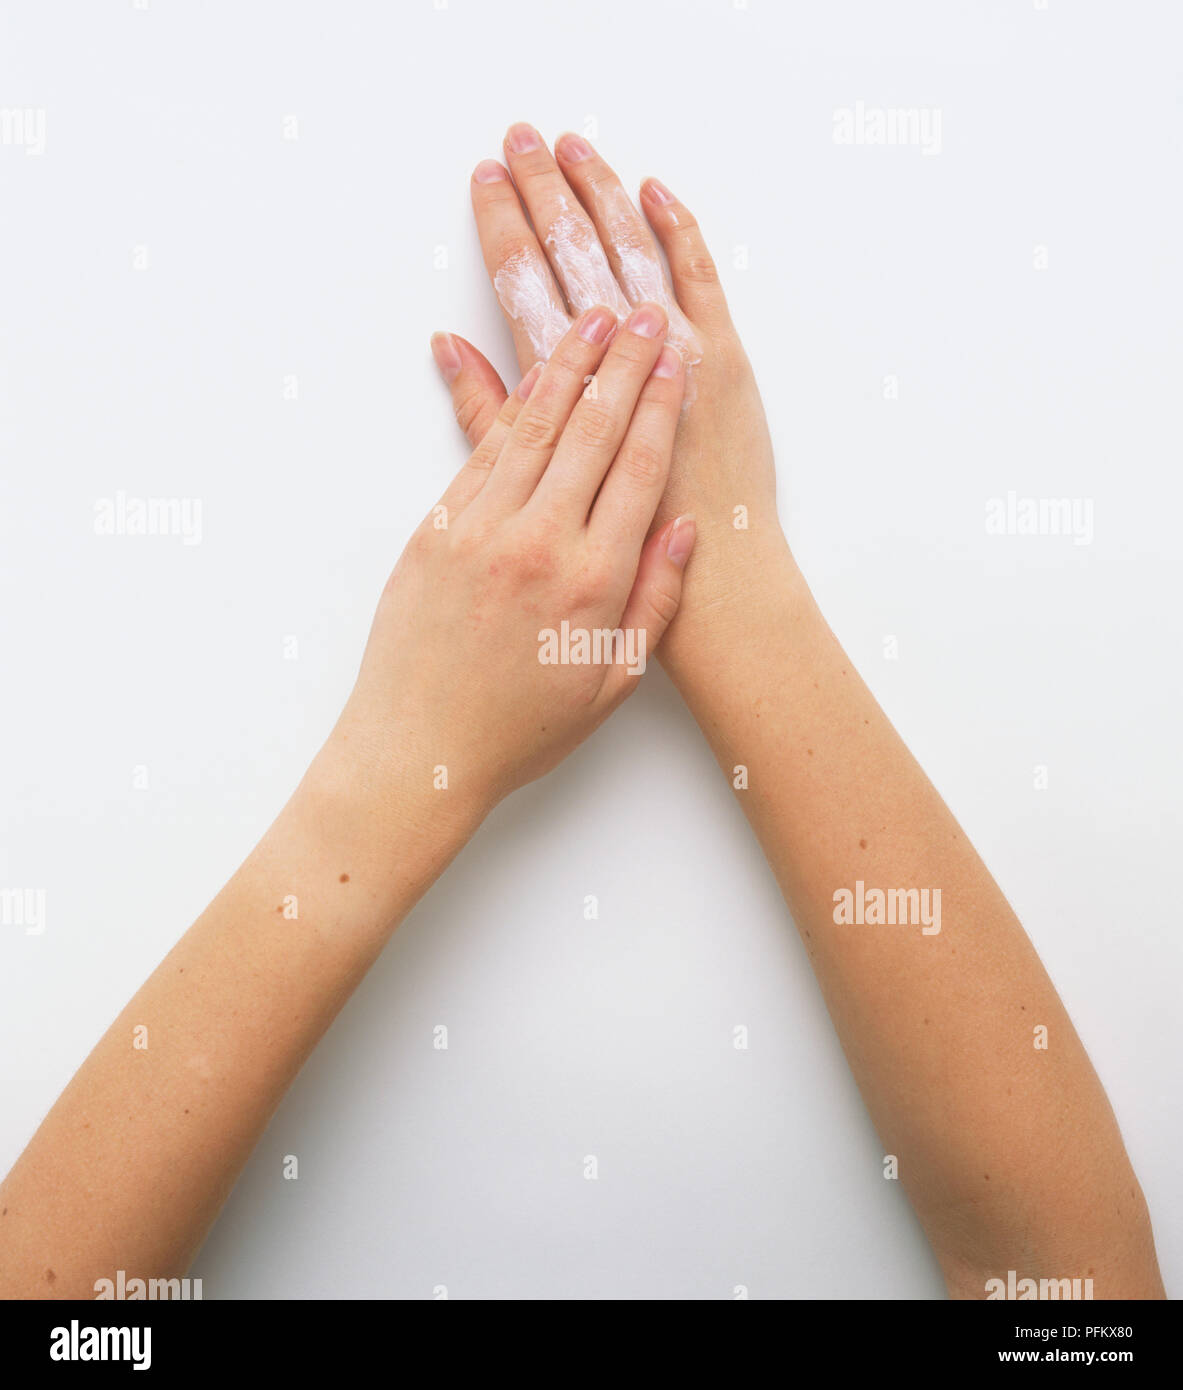 Applying emollient cream to upper side of hand, using fingers, overhead view. Stock Photo